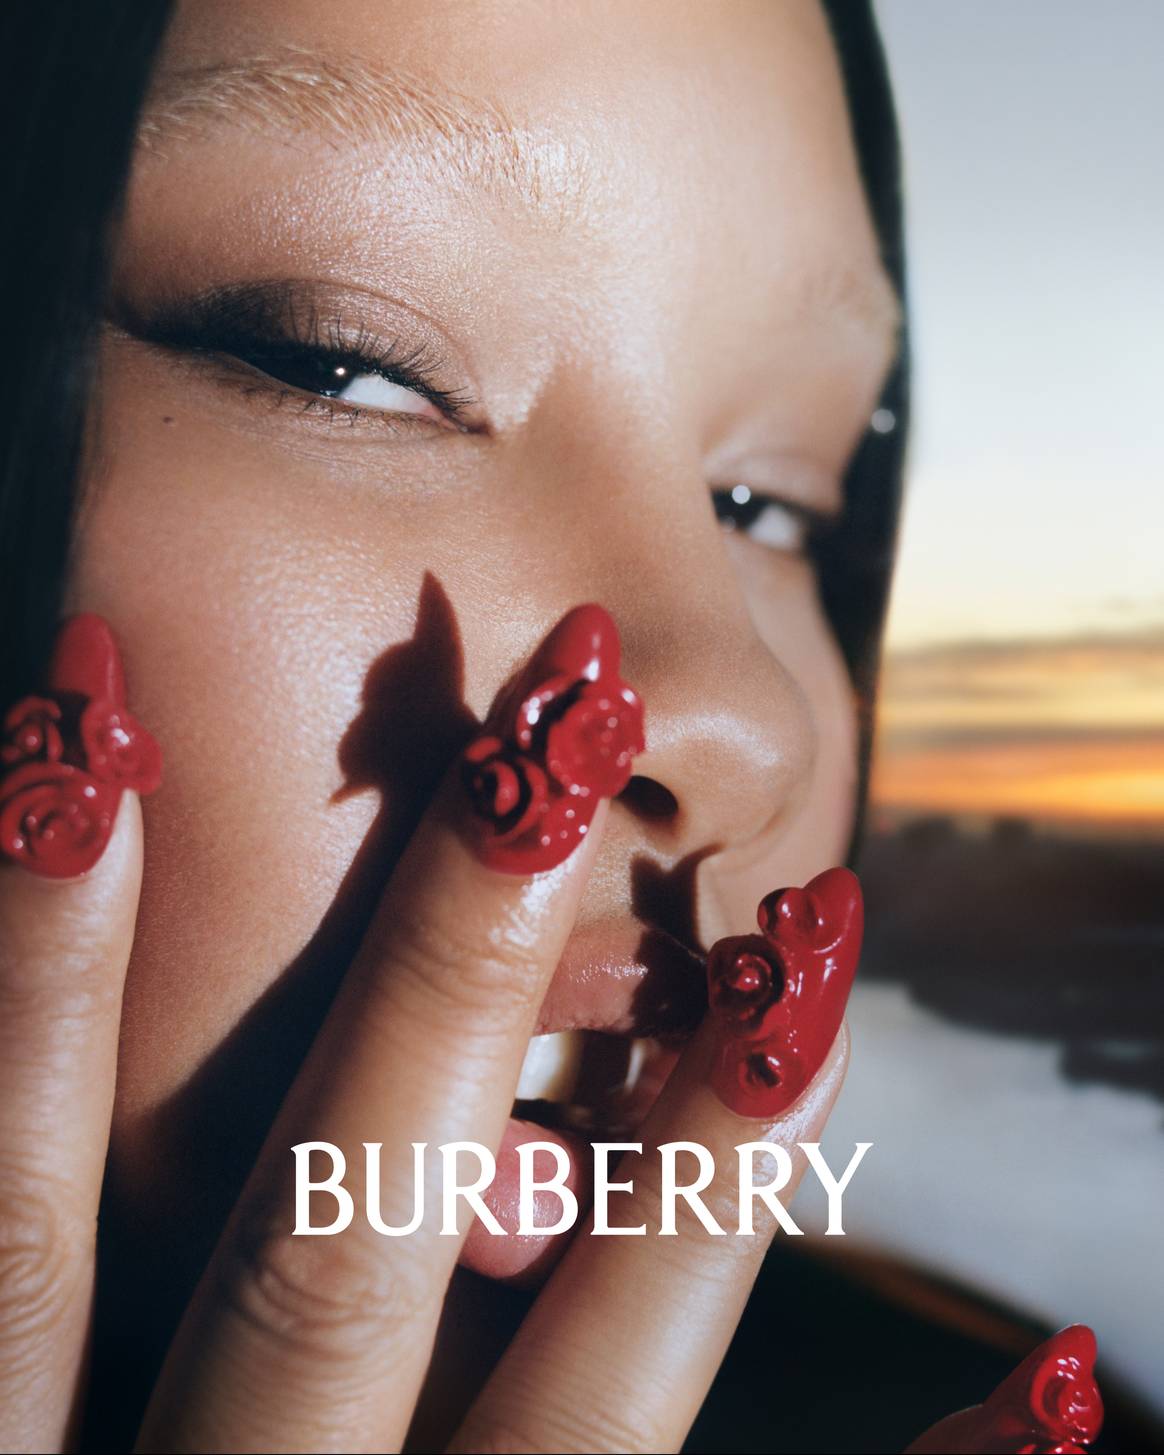 Burberry creative expression, photography and film by Tyrone Lebon. Image: Burberry